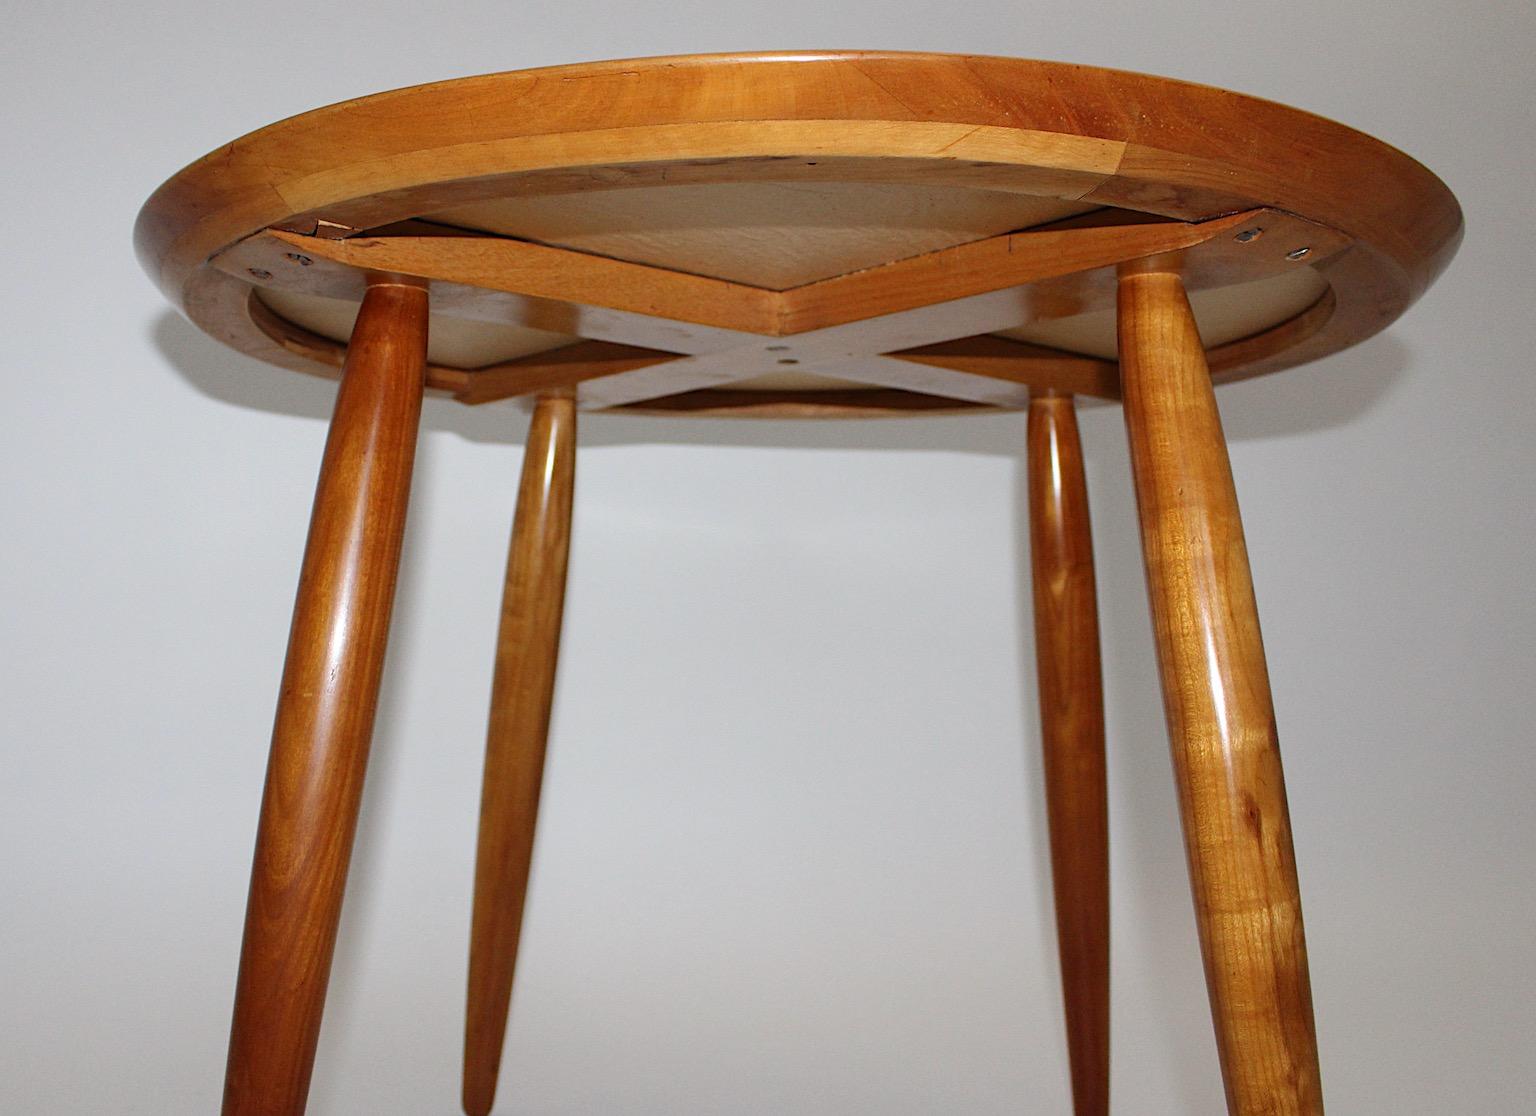 Austrian Mid-Century Modern Vintage Cherry Coffee Table Side Table May Kment 1949 Austria For Sale